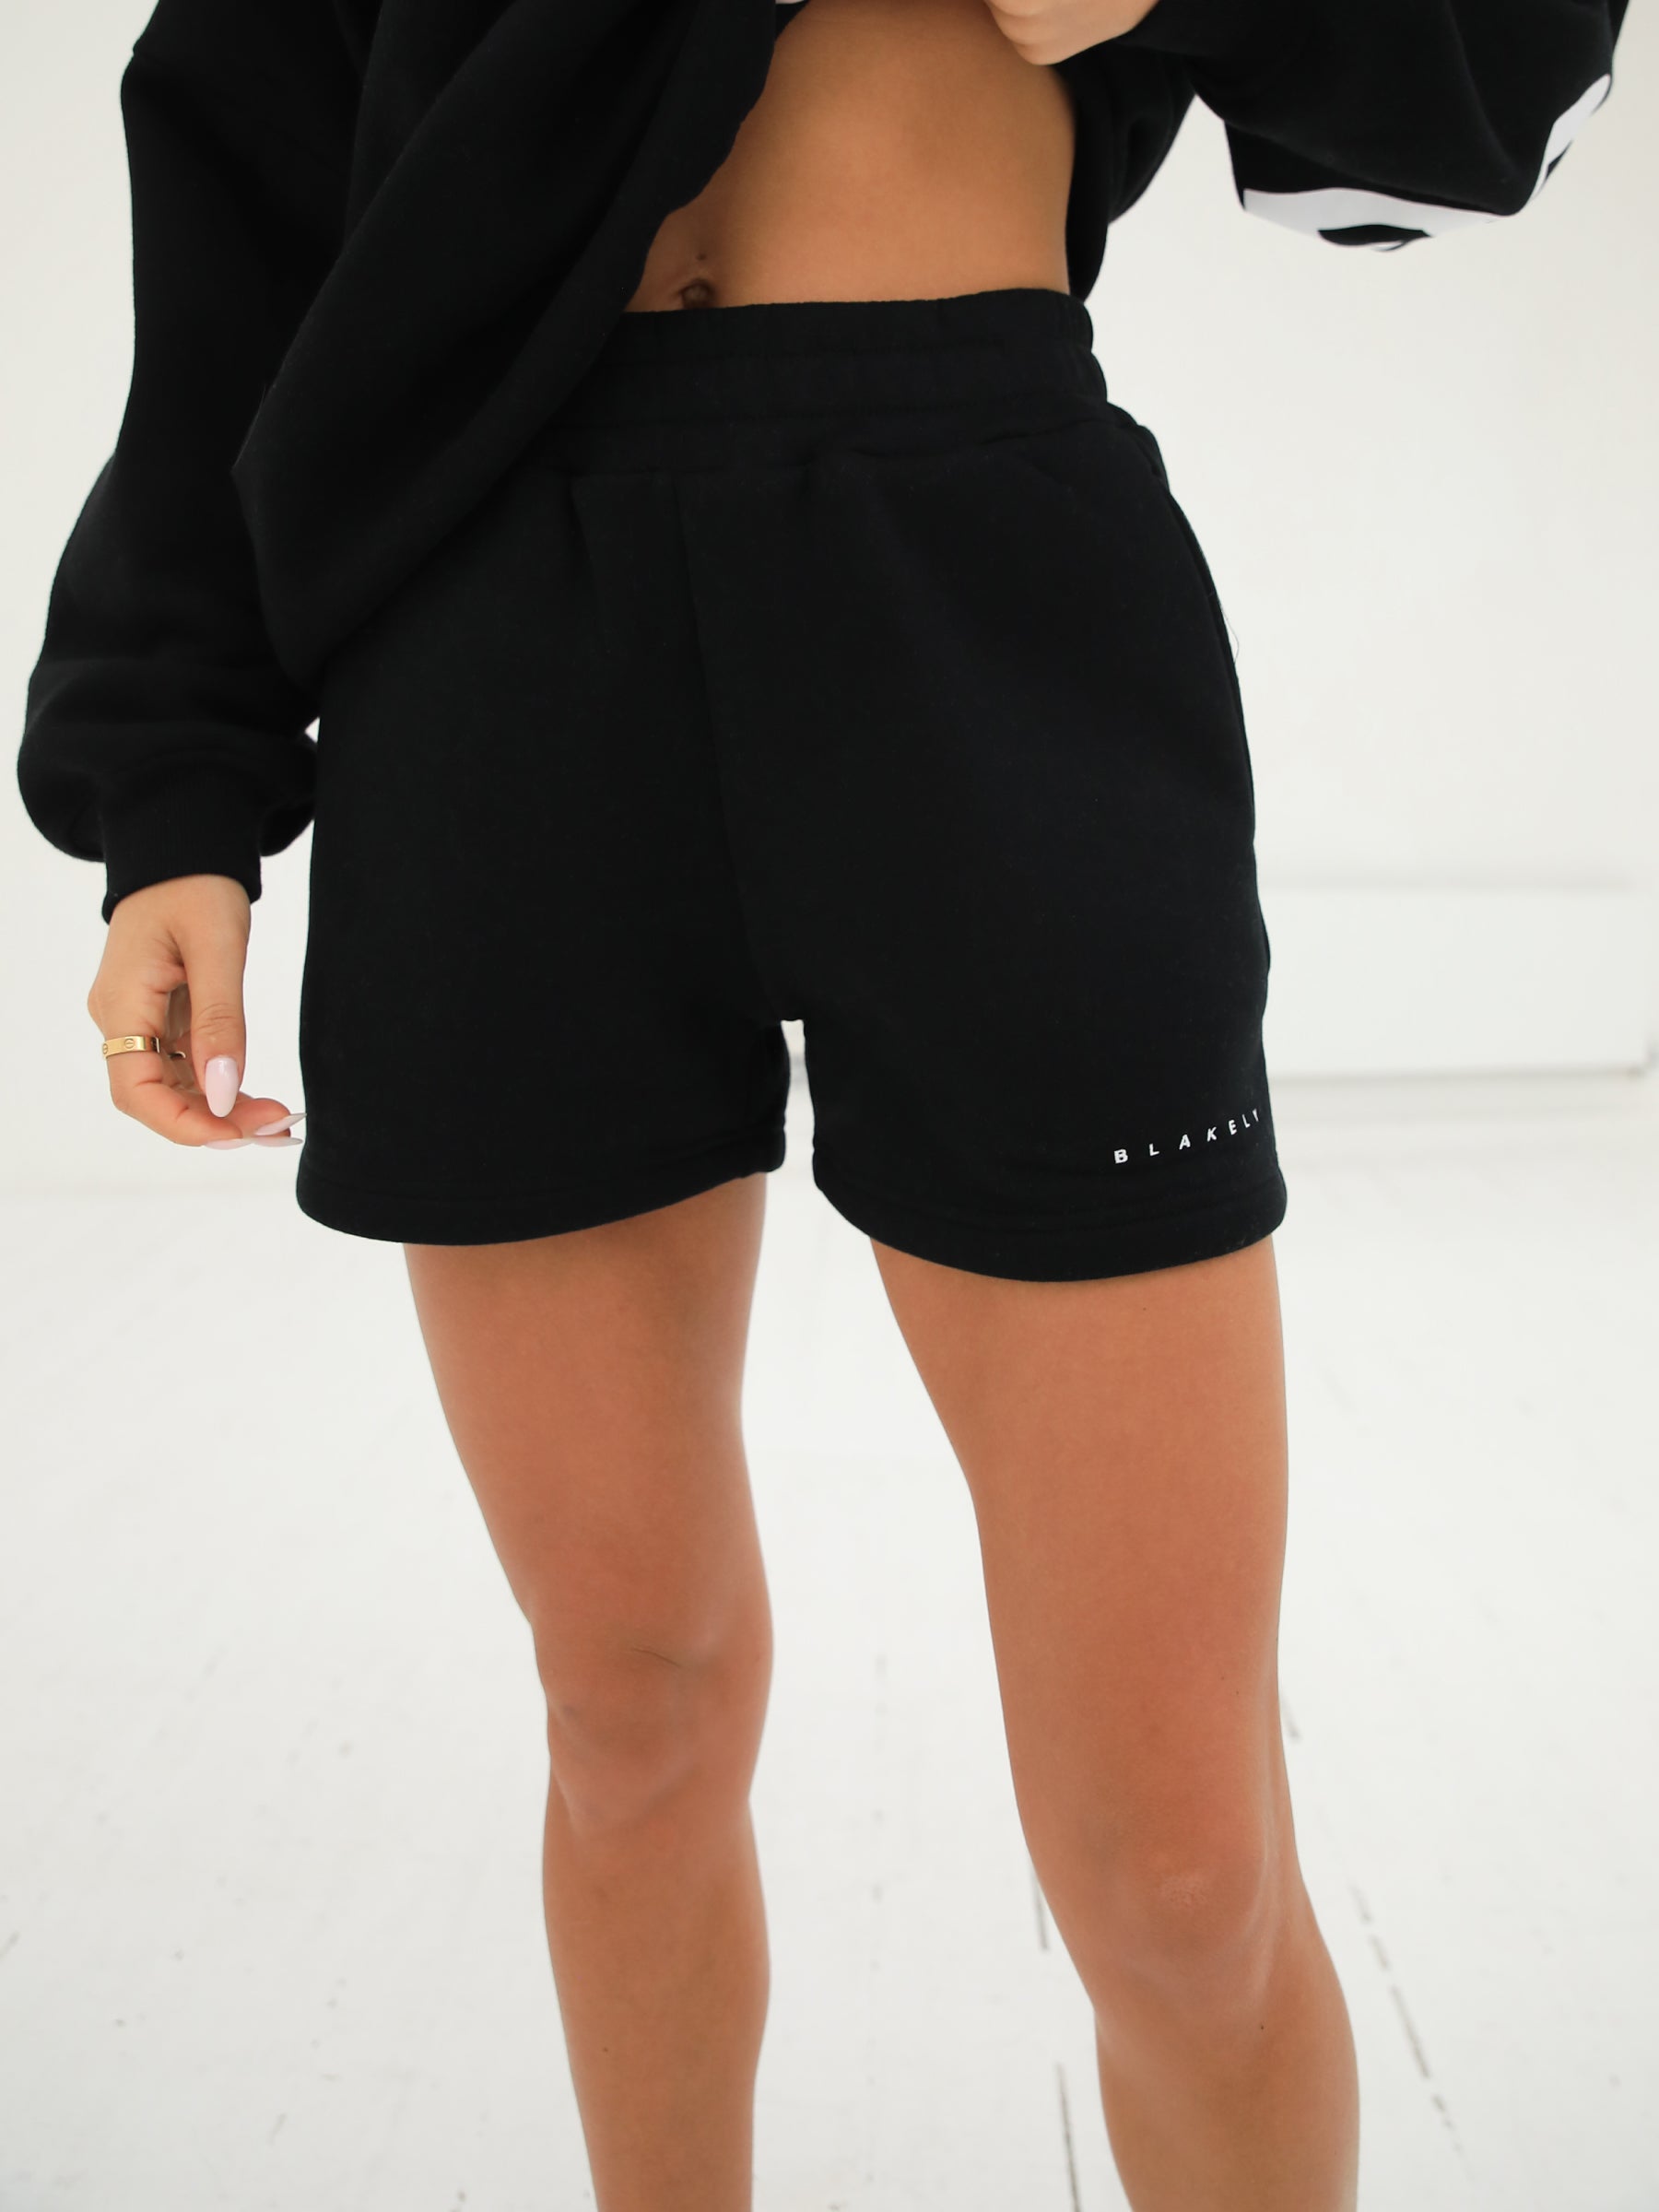 Blakely jogger shorts review ✏️, Gallery posted by shaunacannell